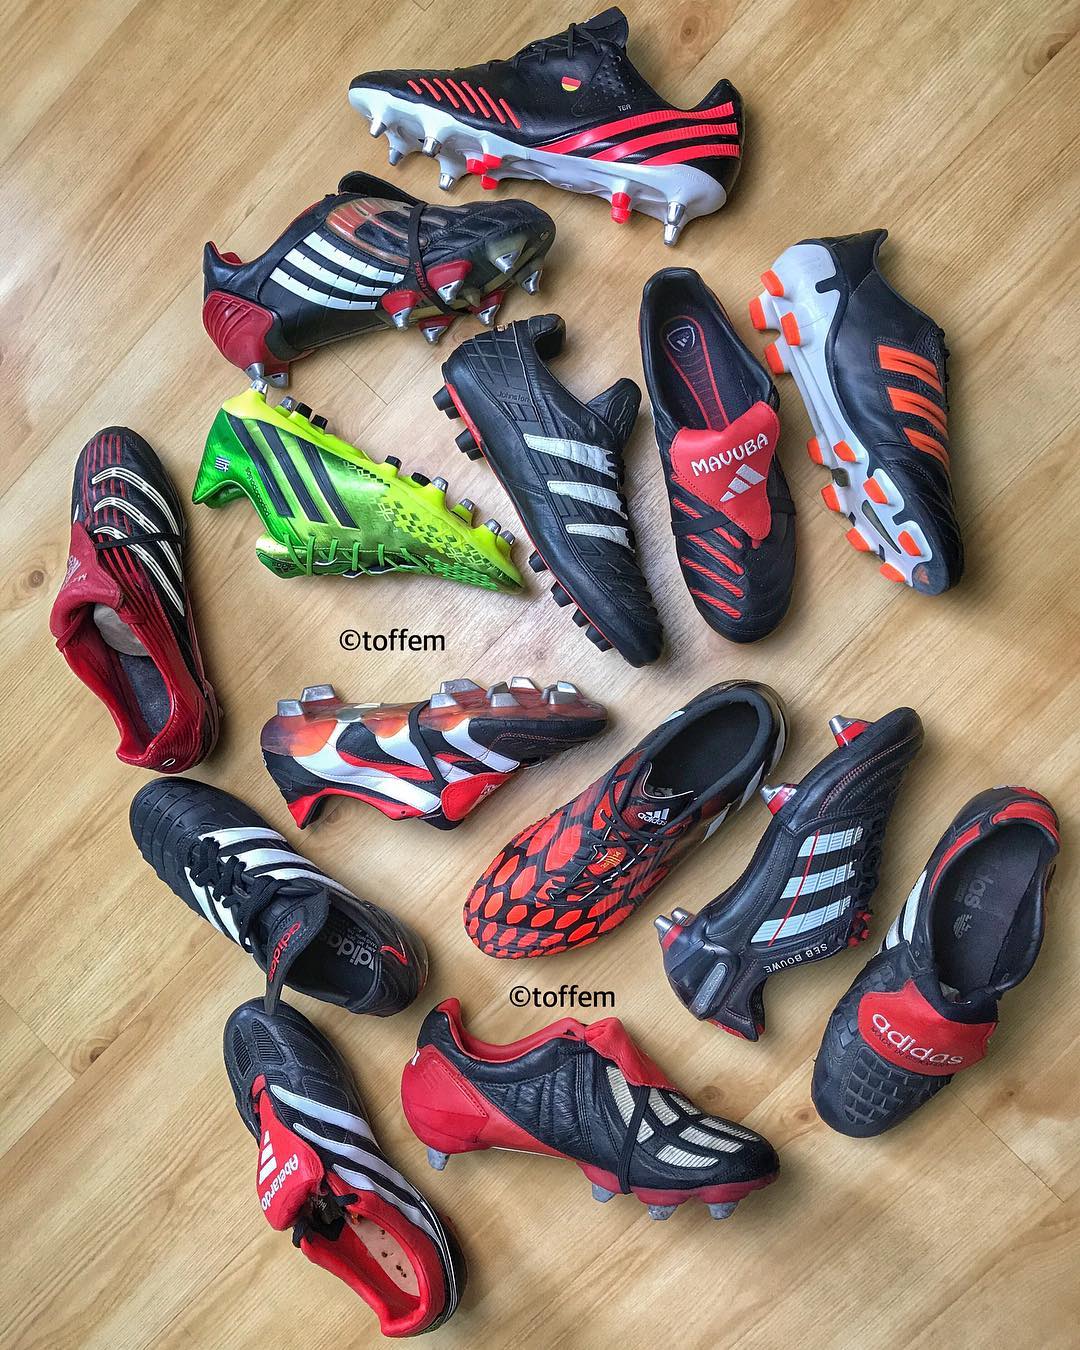 Adidas Predator Mania SG Remake Boots Released - Just 2,002 Pairs Available  - Footy Headlines